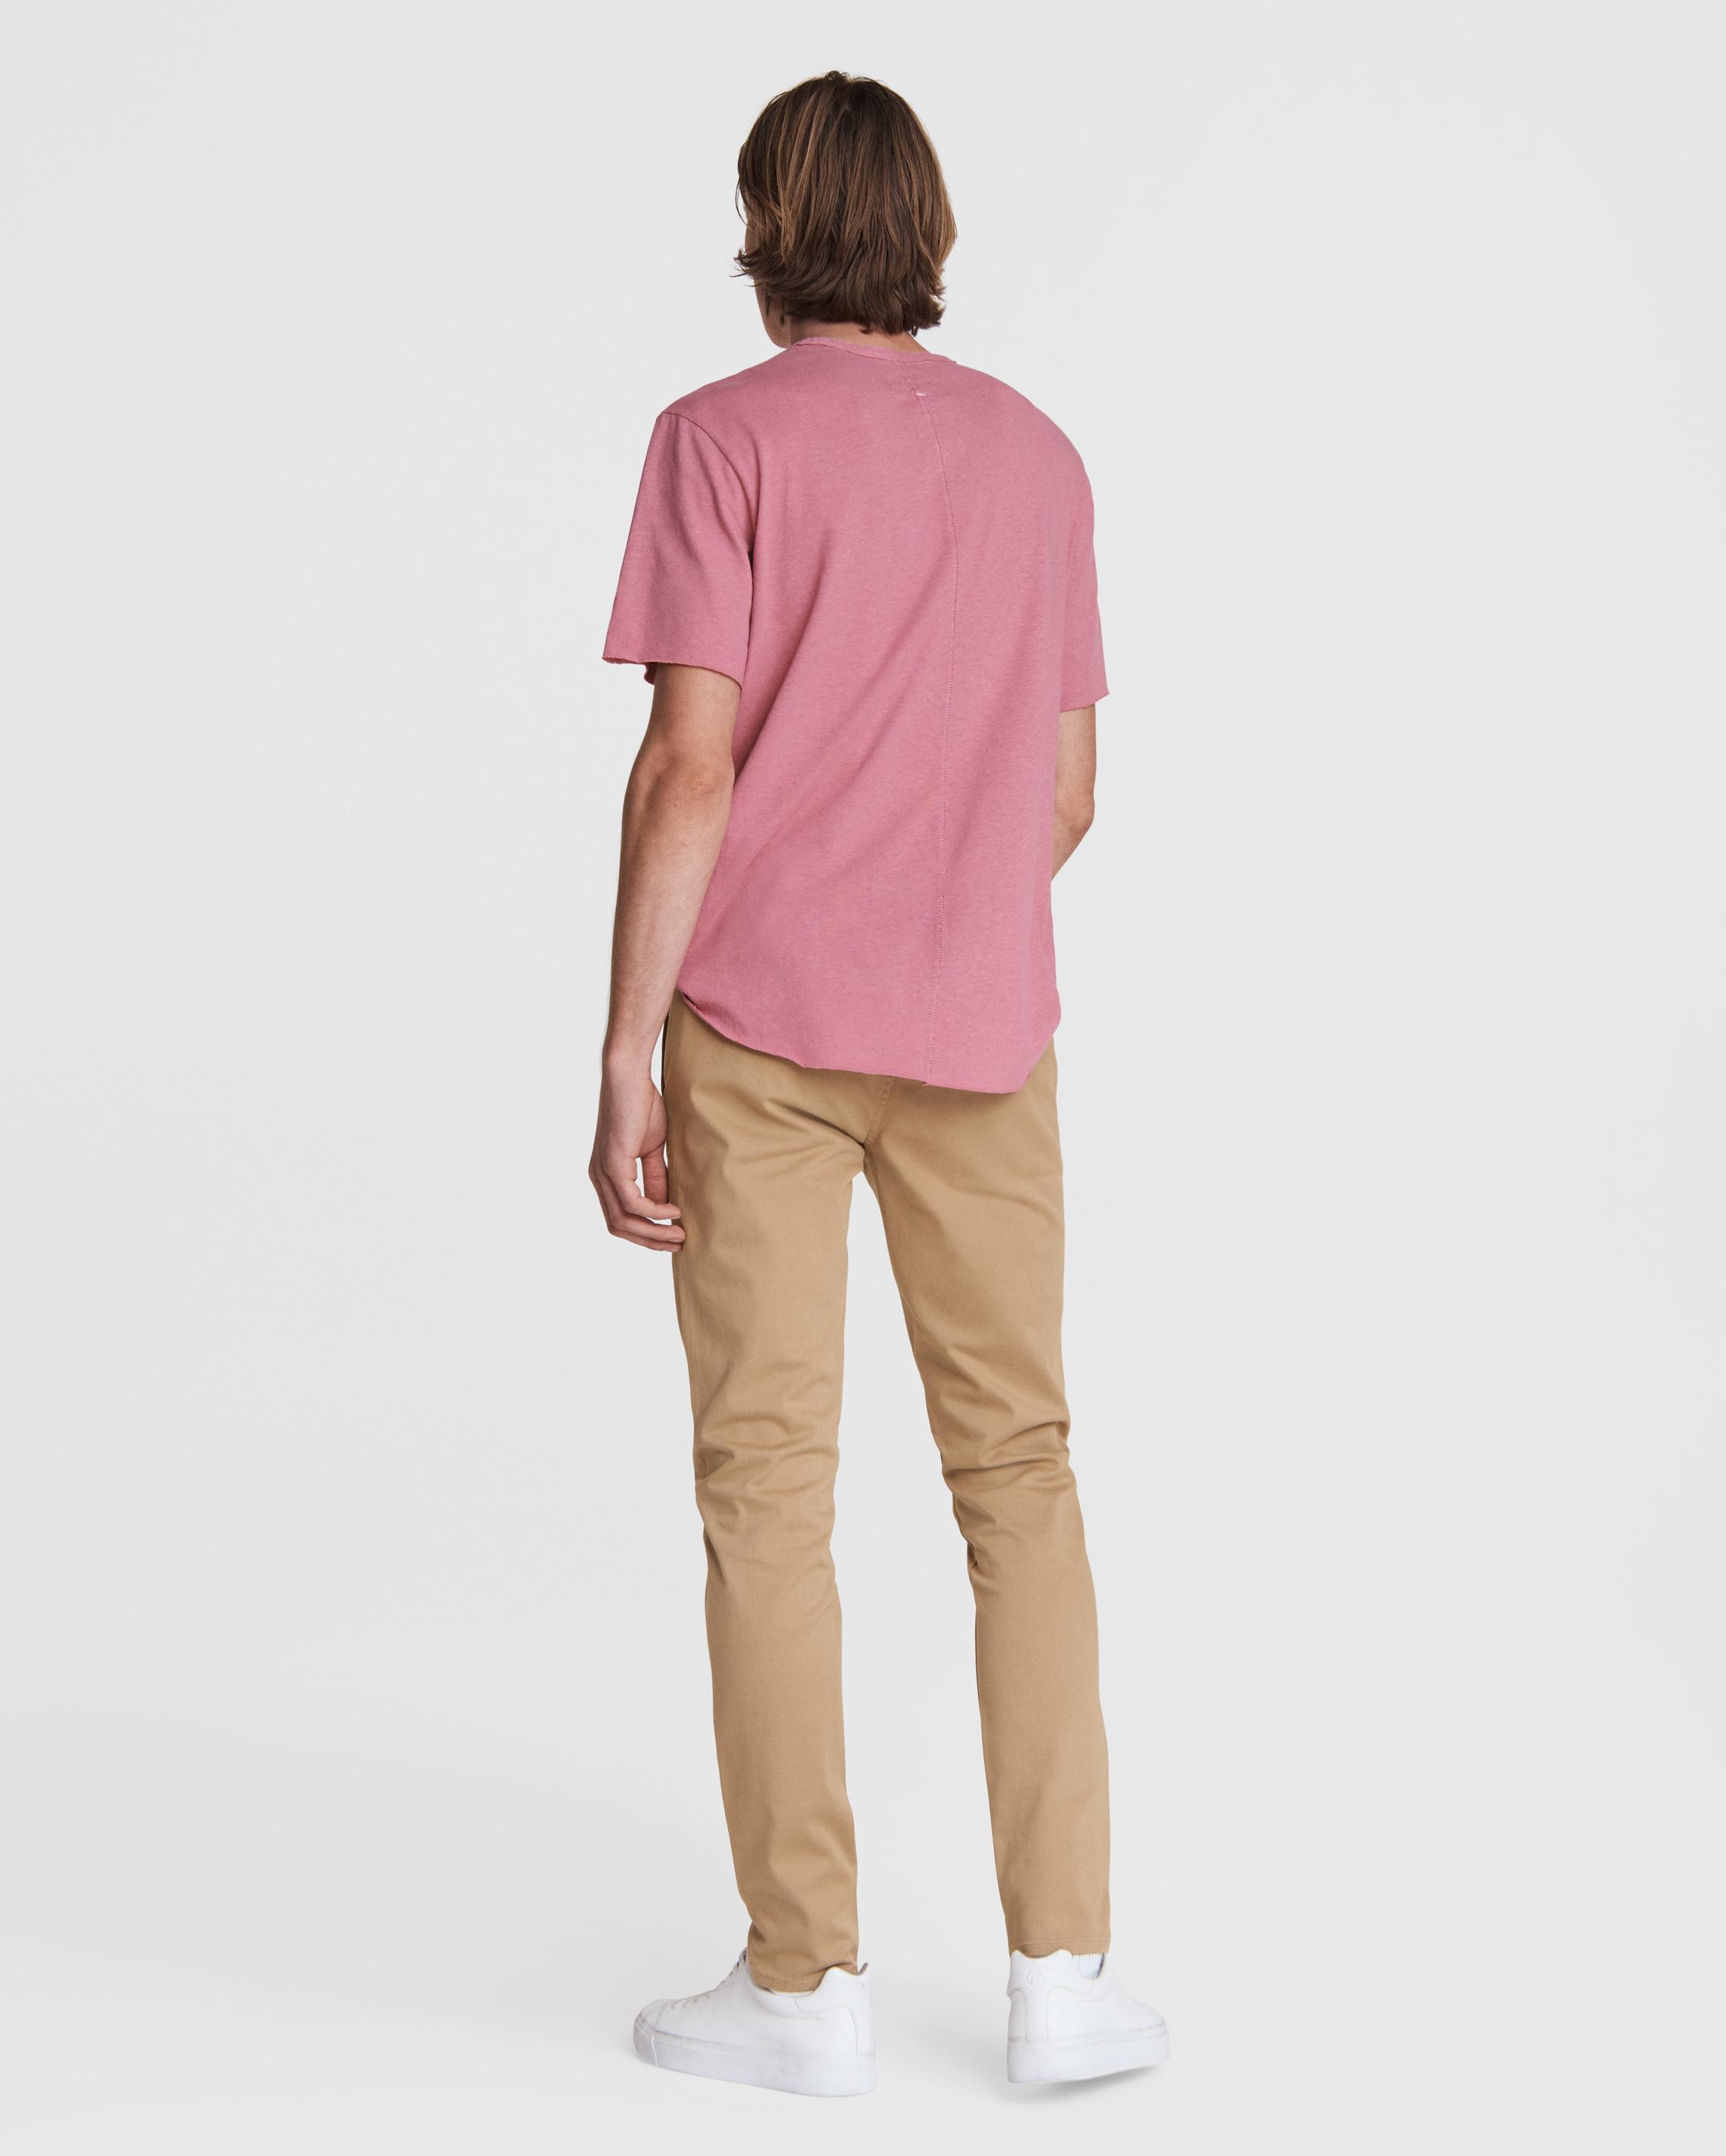 Fit 1 Stretch Twill Chino image number 5